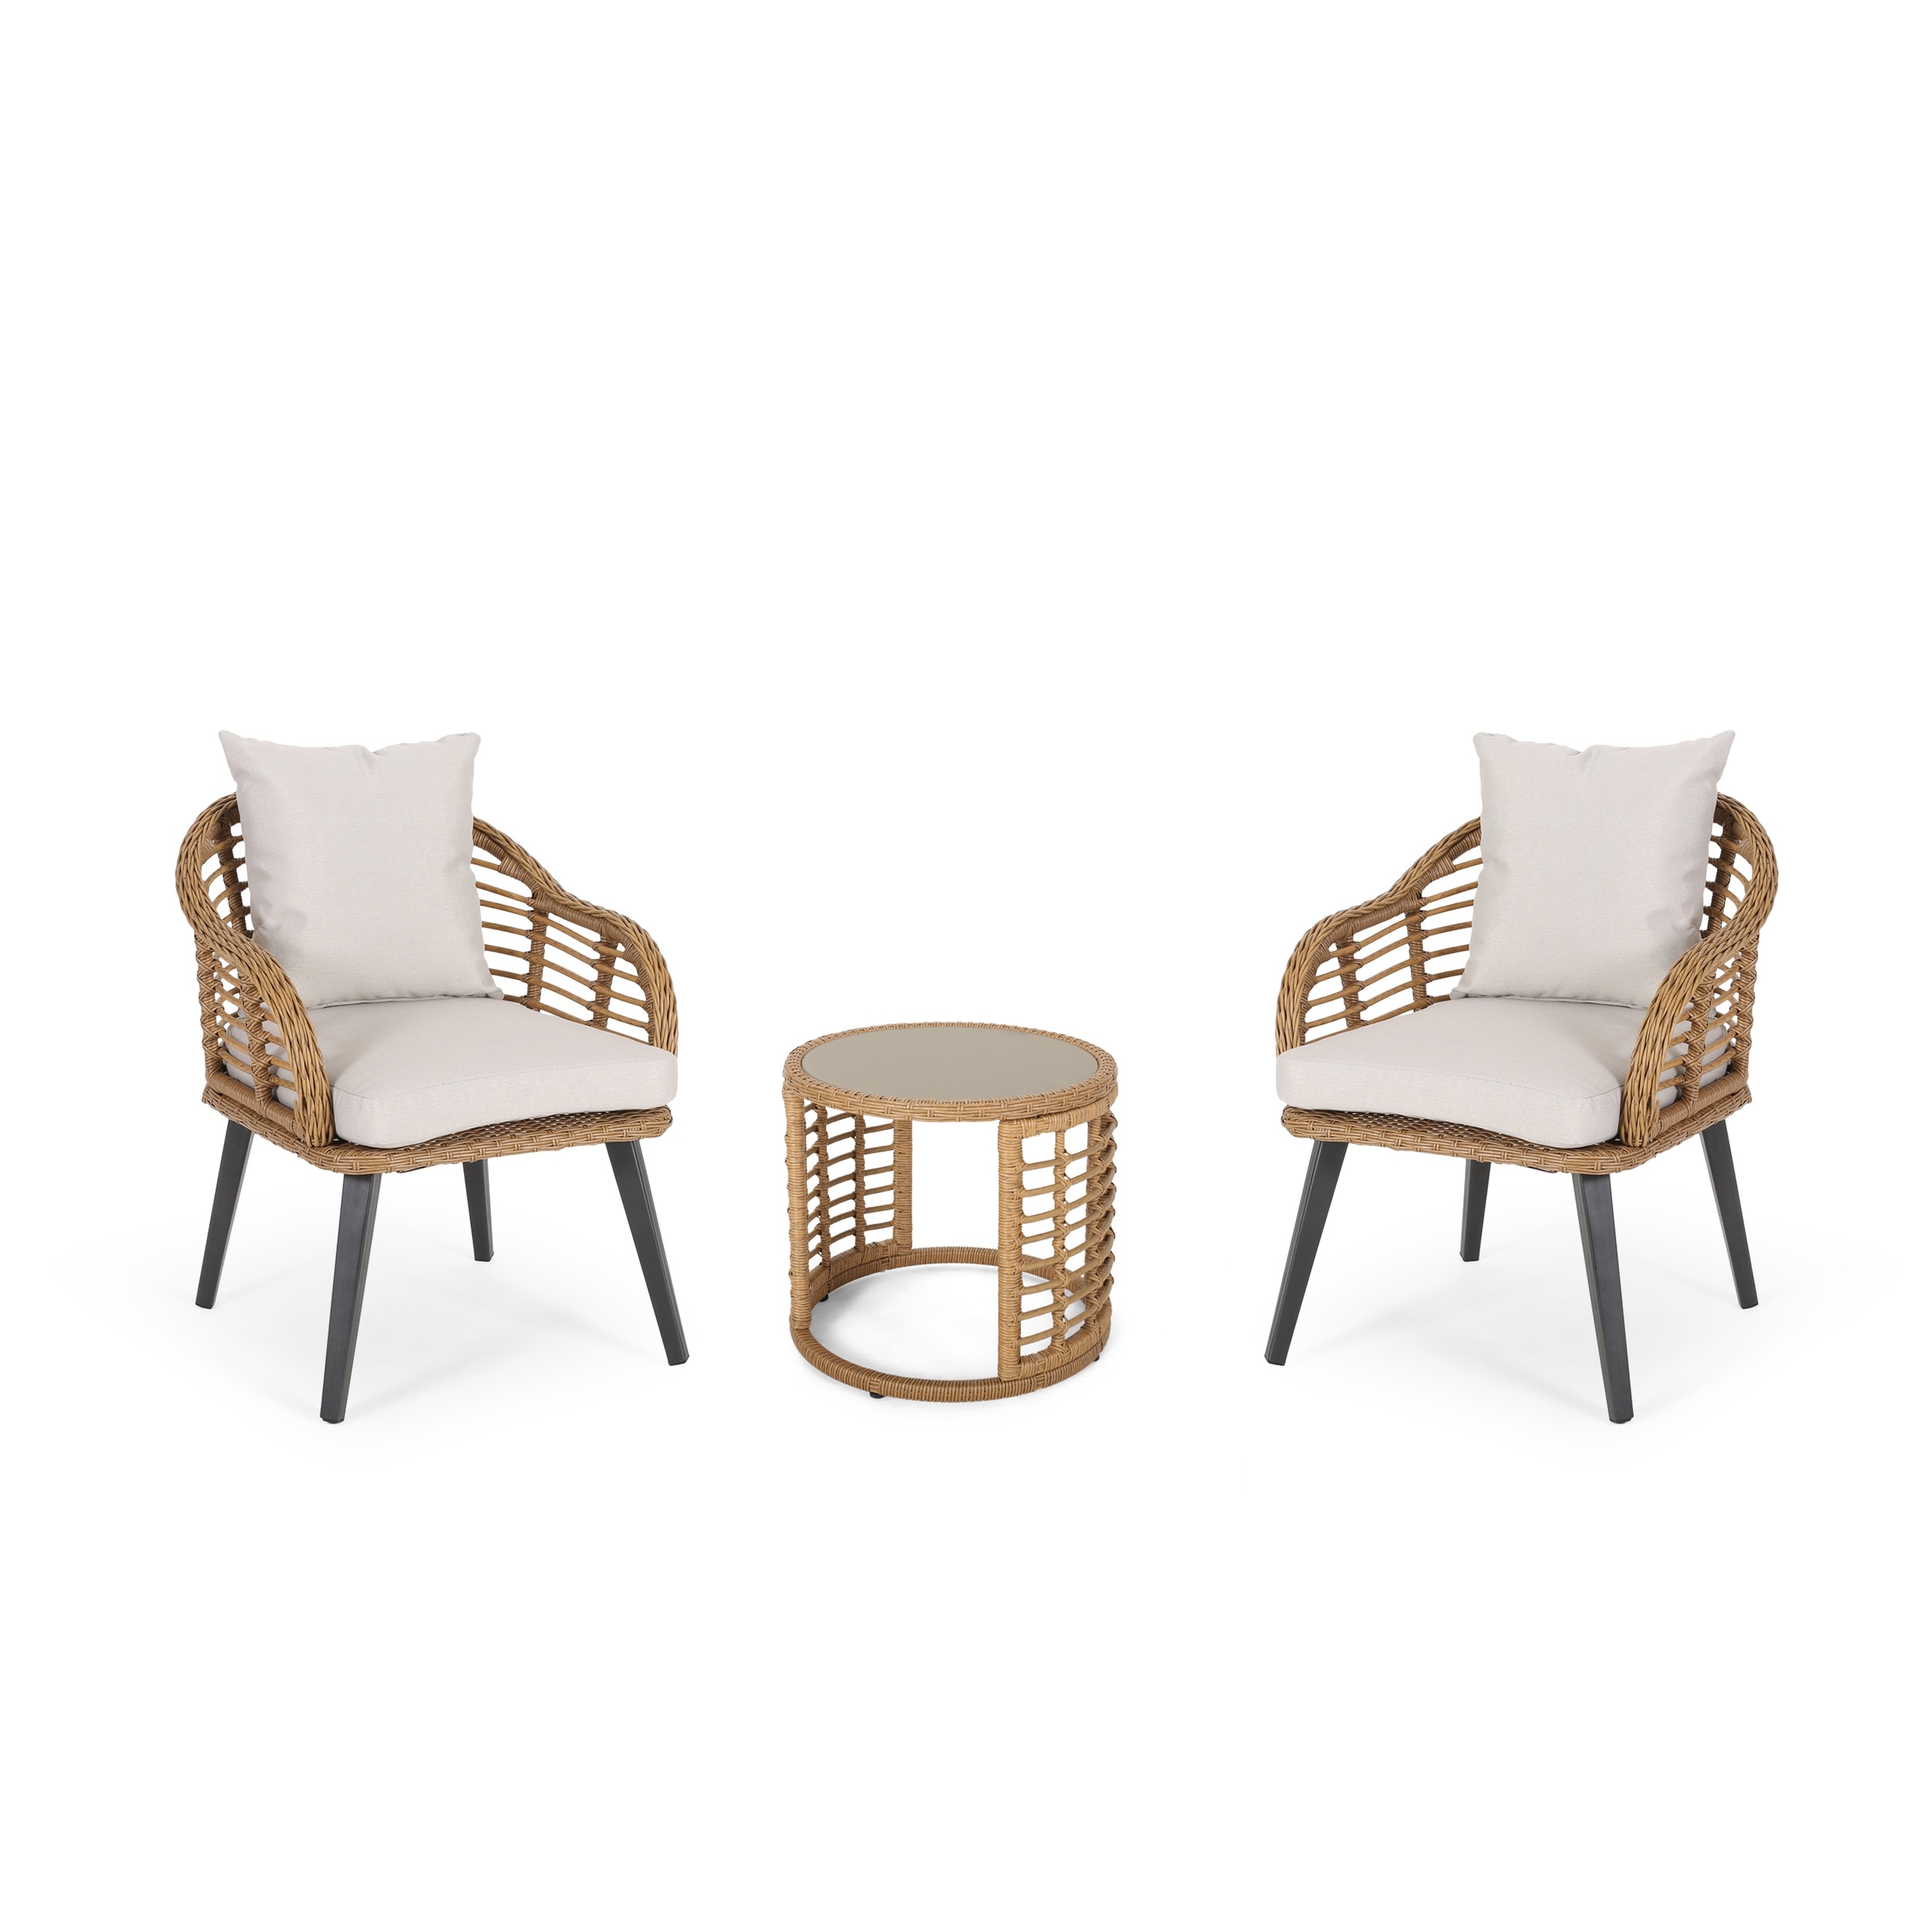 Tatiana Outdoor 3-piece Boho Wicker Chat Set By Christopher Knight Home